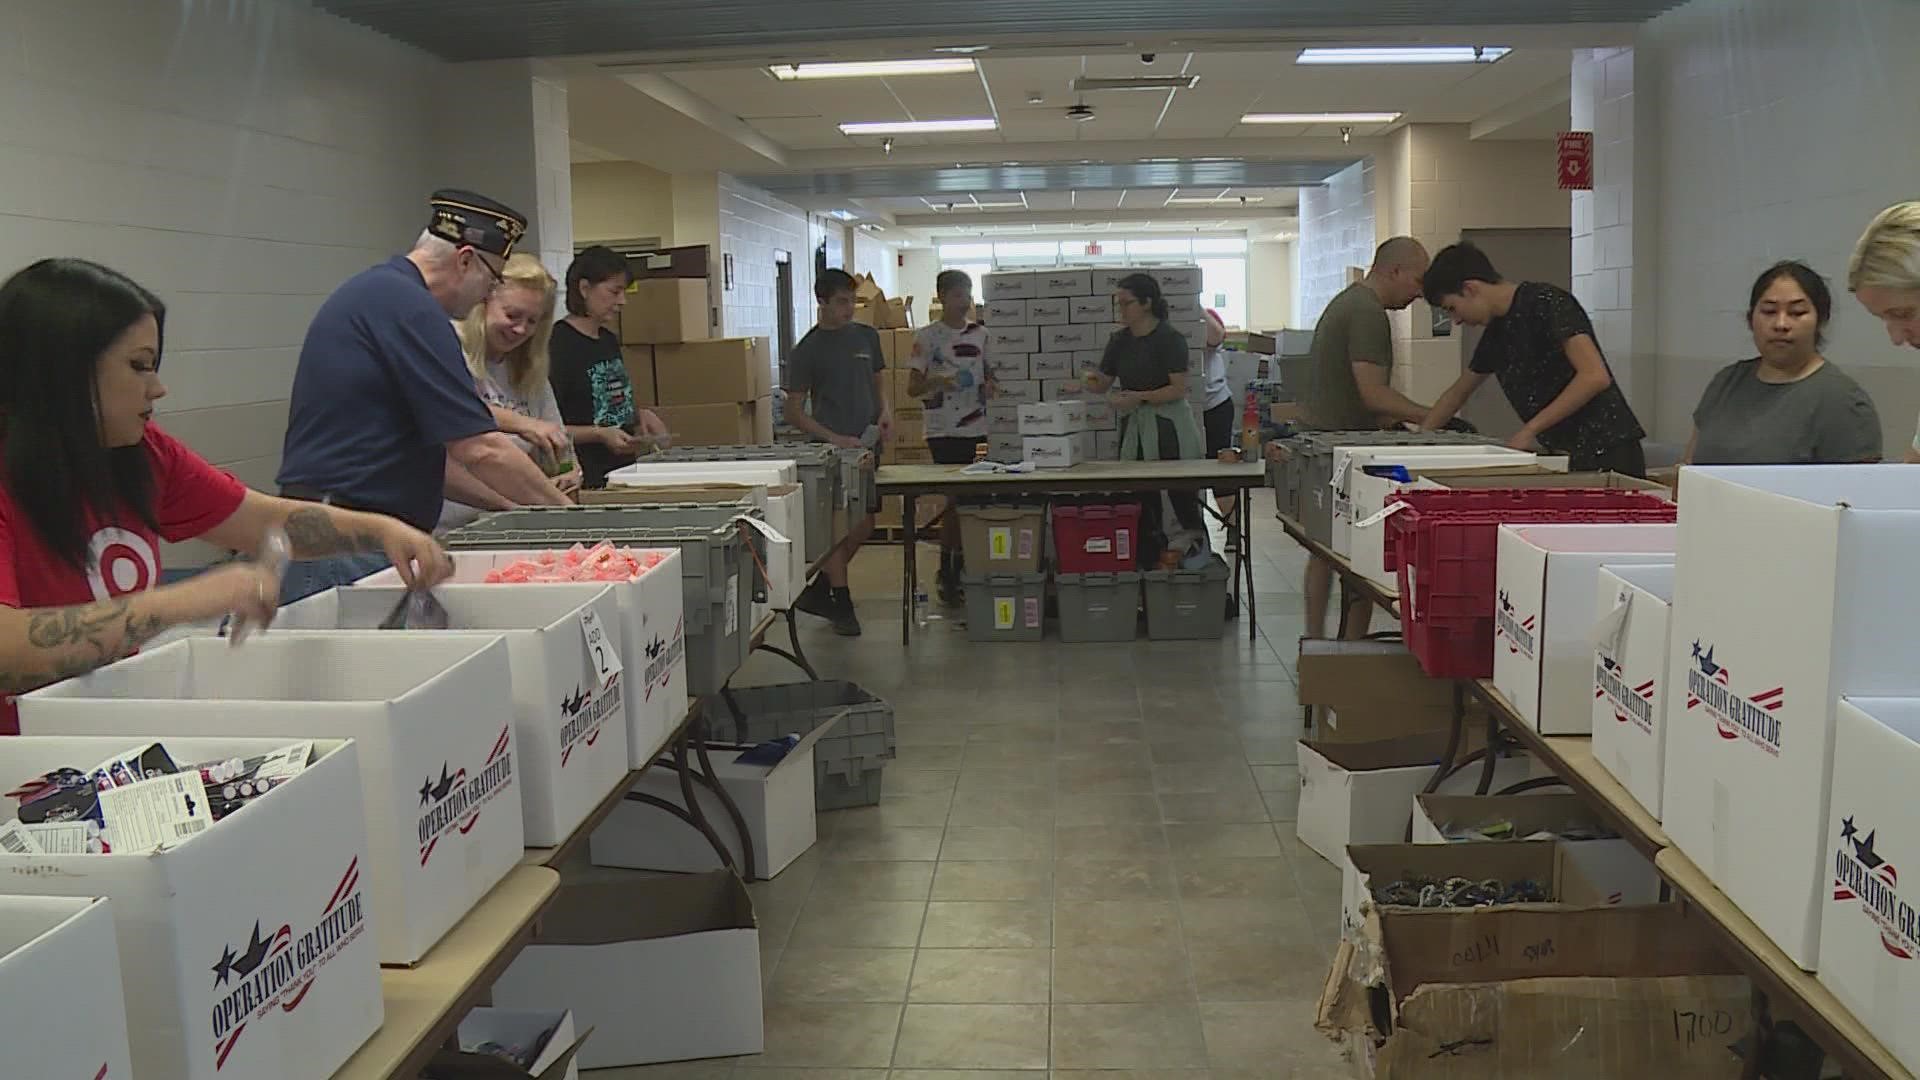 Operation gratitude has sent over 3.5 million care packages to service members.